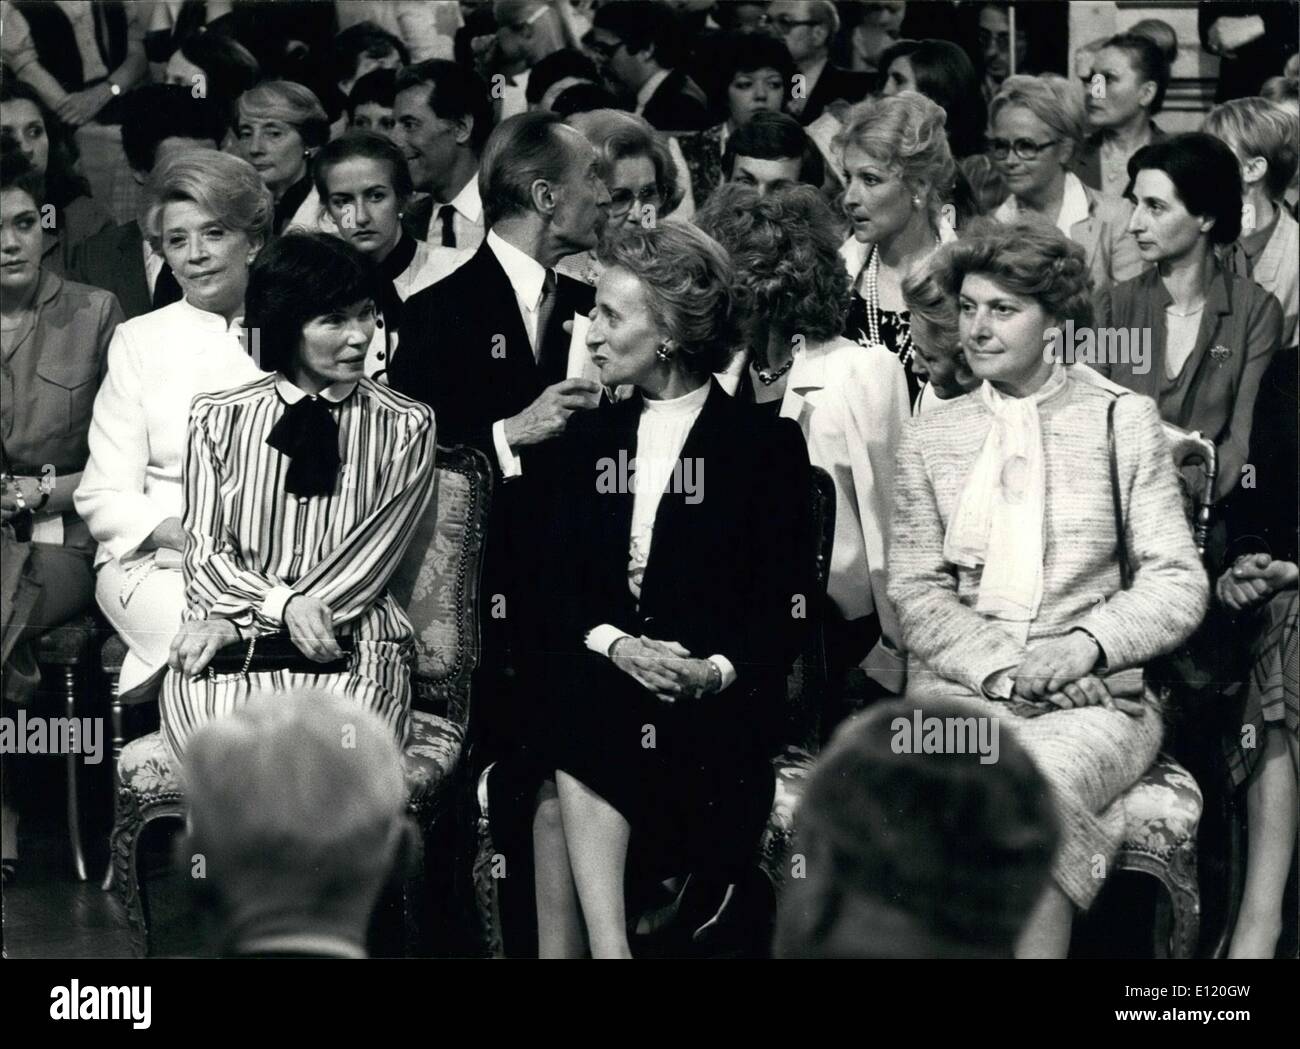 May 22, 1981 - Political wives: First Lady of France Daniele Mitterand, Bernadette Chirac, wife of the Mayor of Paris and Mrs. Mauroy, wife of Prime Minister Pierre Mauroy. Stock Photo